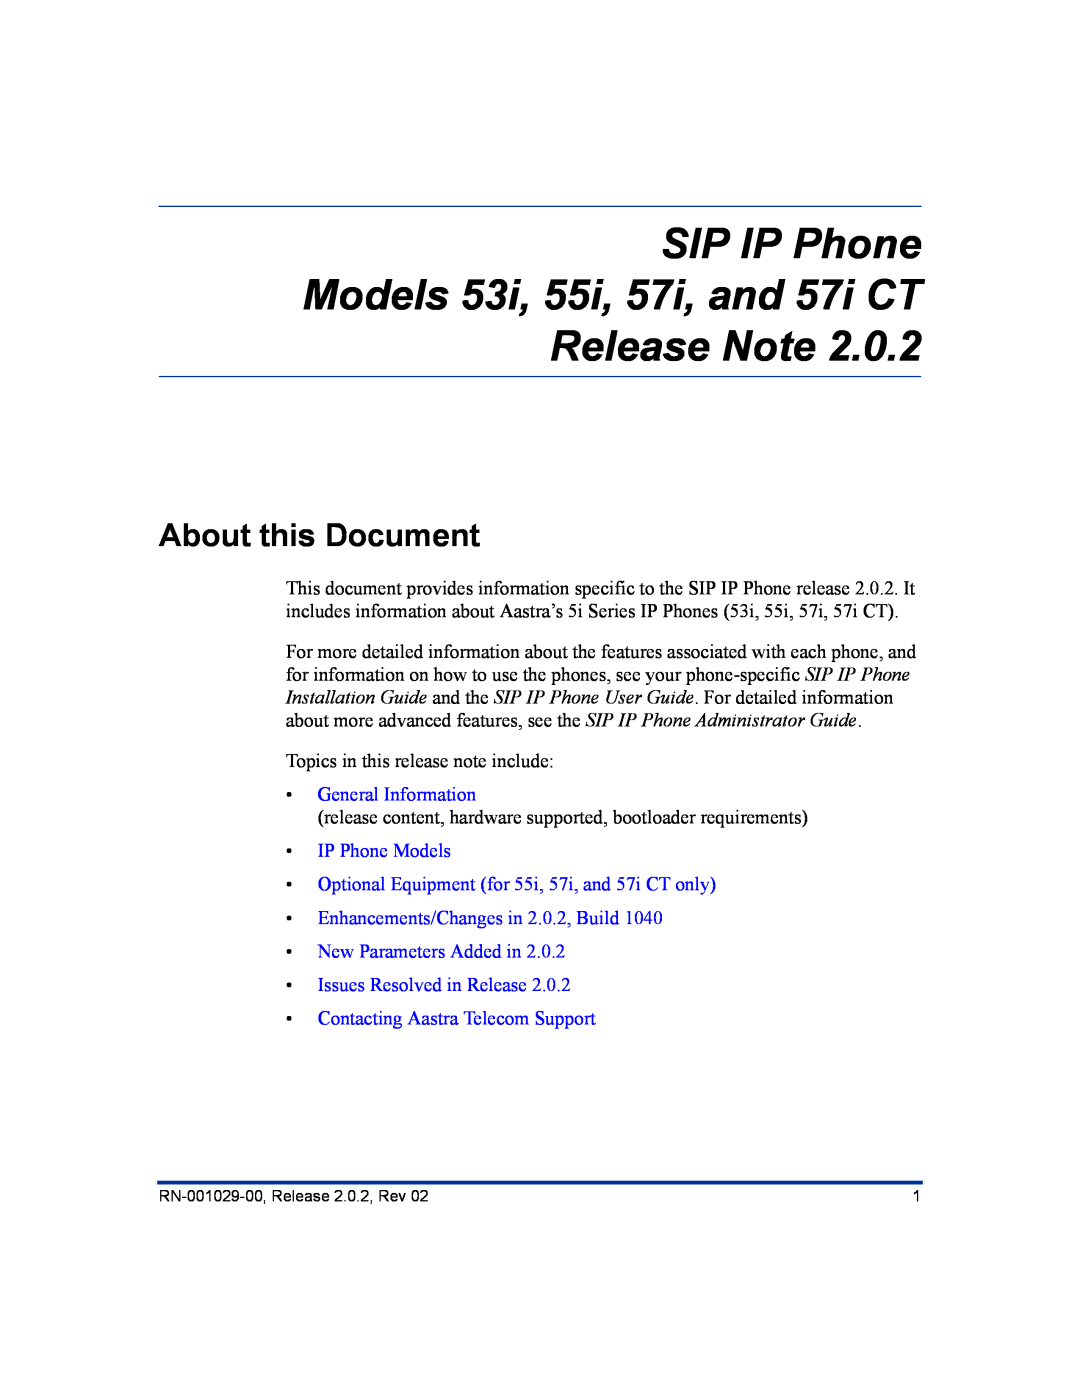 Aastra Telecom 57I About this Document, SIP IP Phone Models 53i, 55i, 57i, and 57i CT Release Note, General Information 